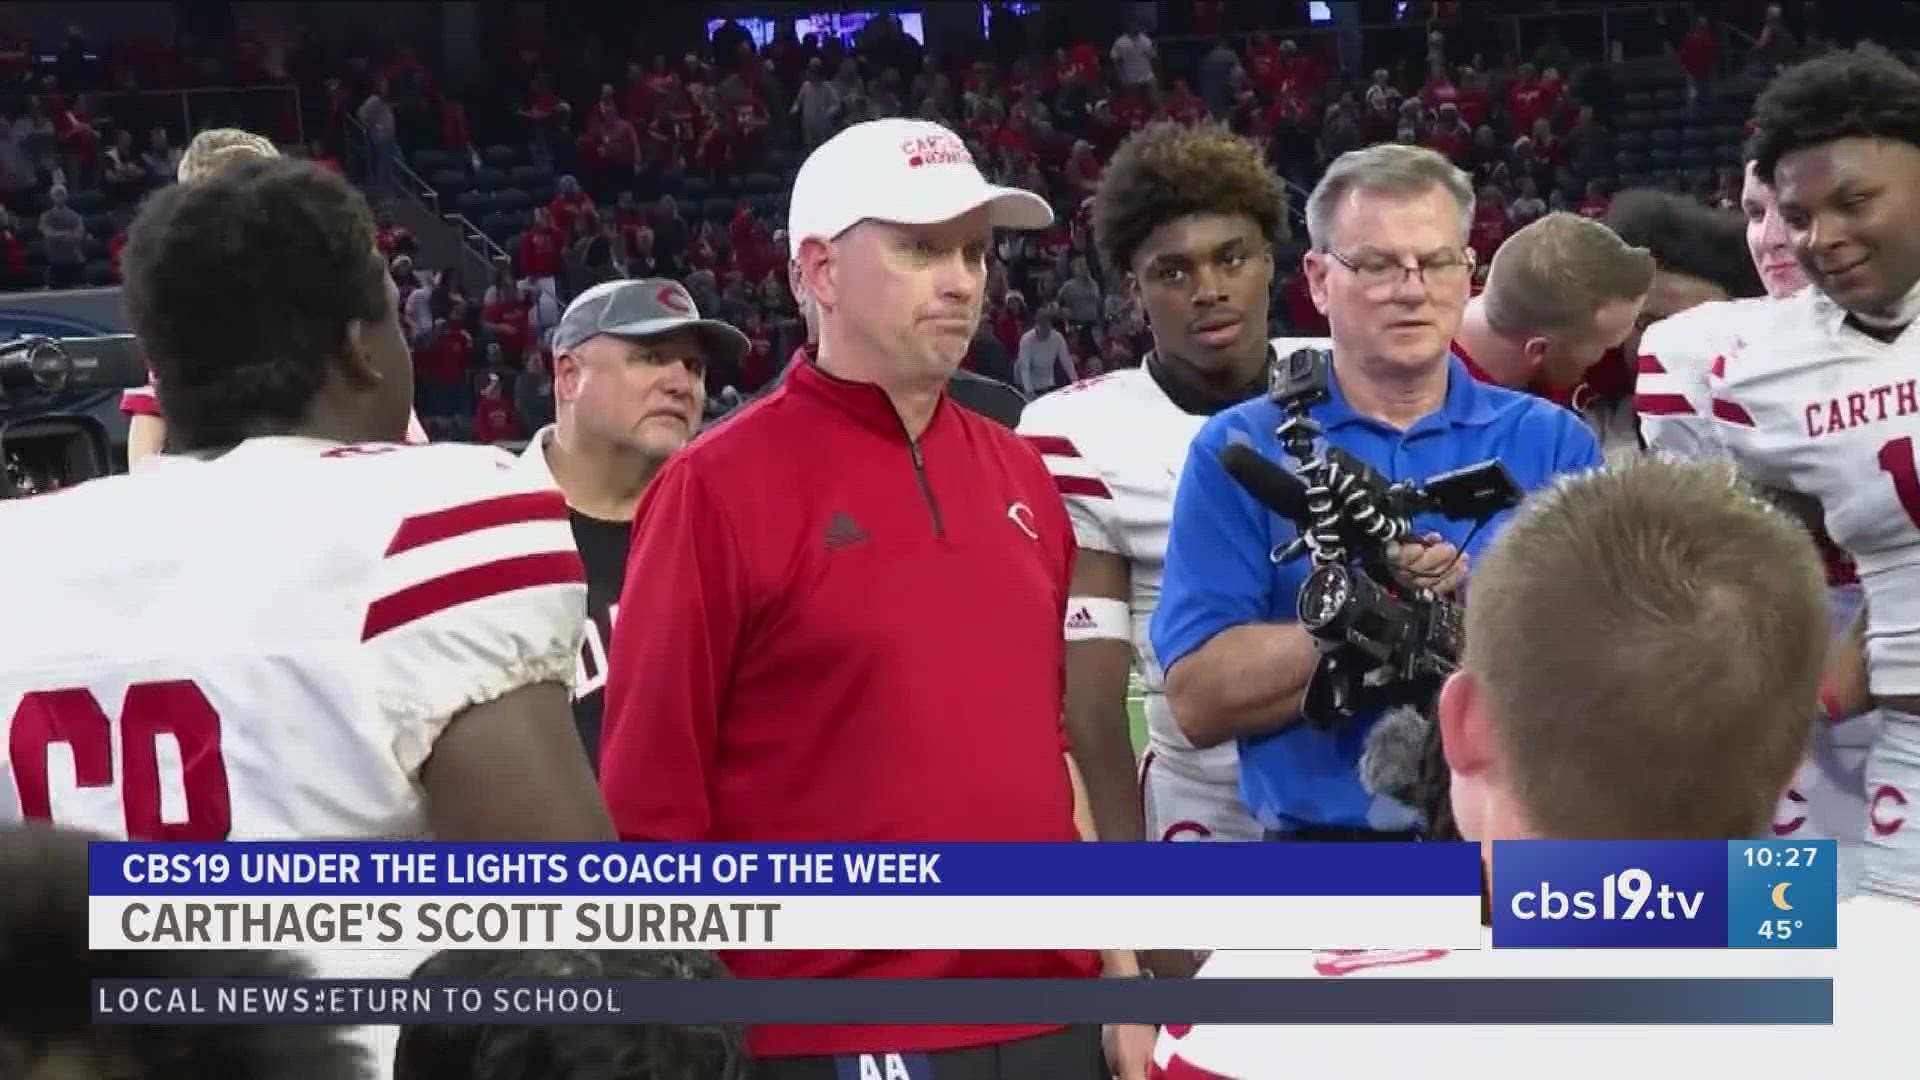 Coach Scott Surratt and his Carthage Bulldogs are headed to the state championship for the ninth time in his career, earning him Coach of the Week.